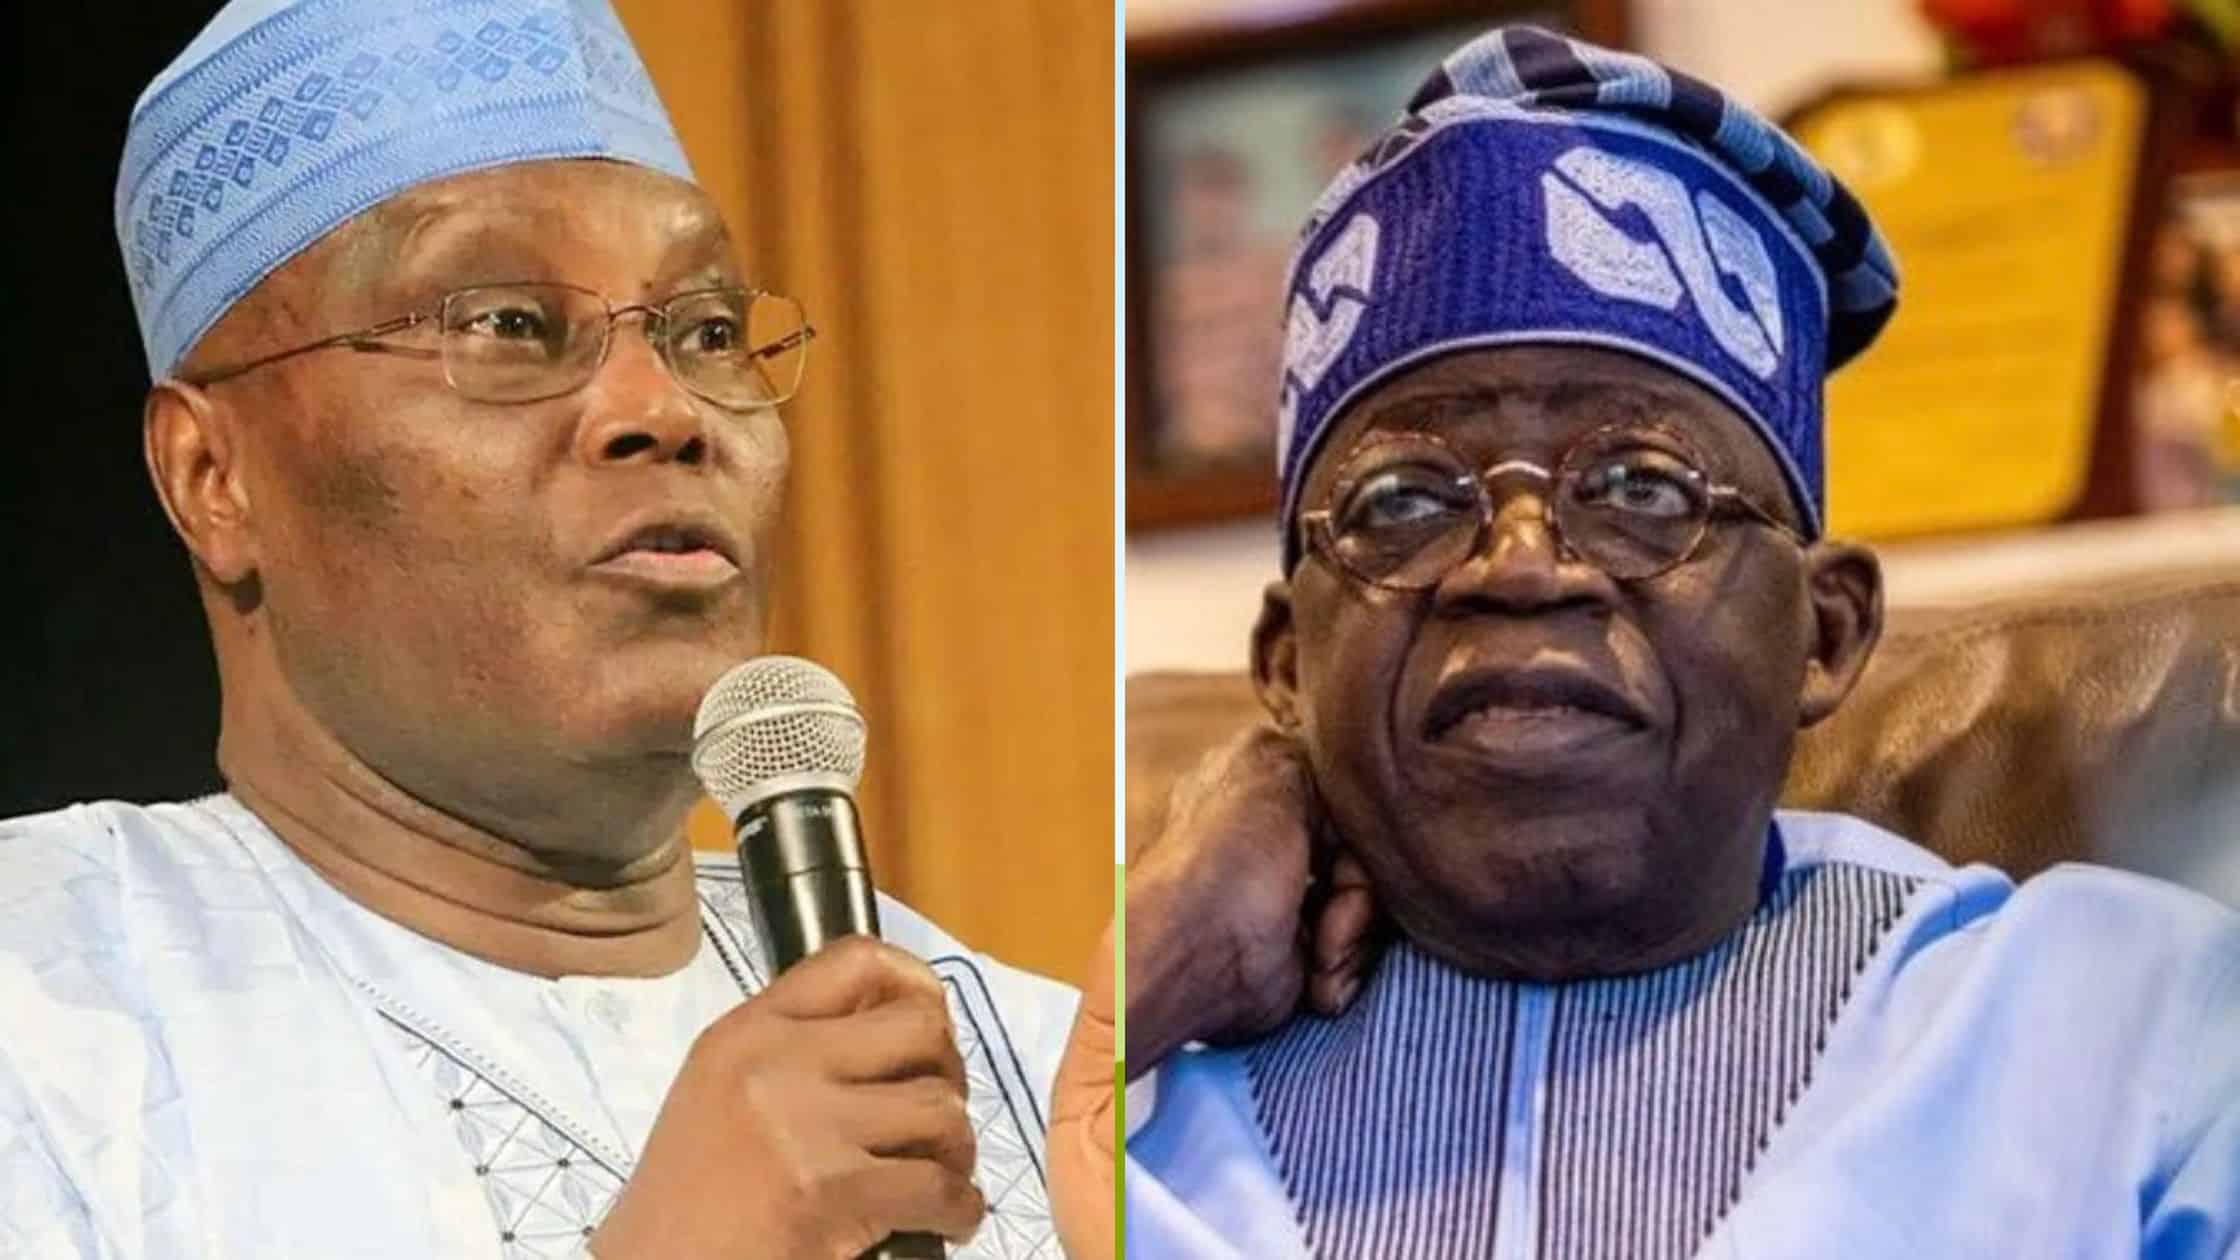 “Tinubu Cannot Be The Best Product From Lagos" - Atiku Camp Attacks APC Candidate